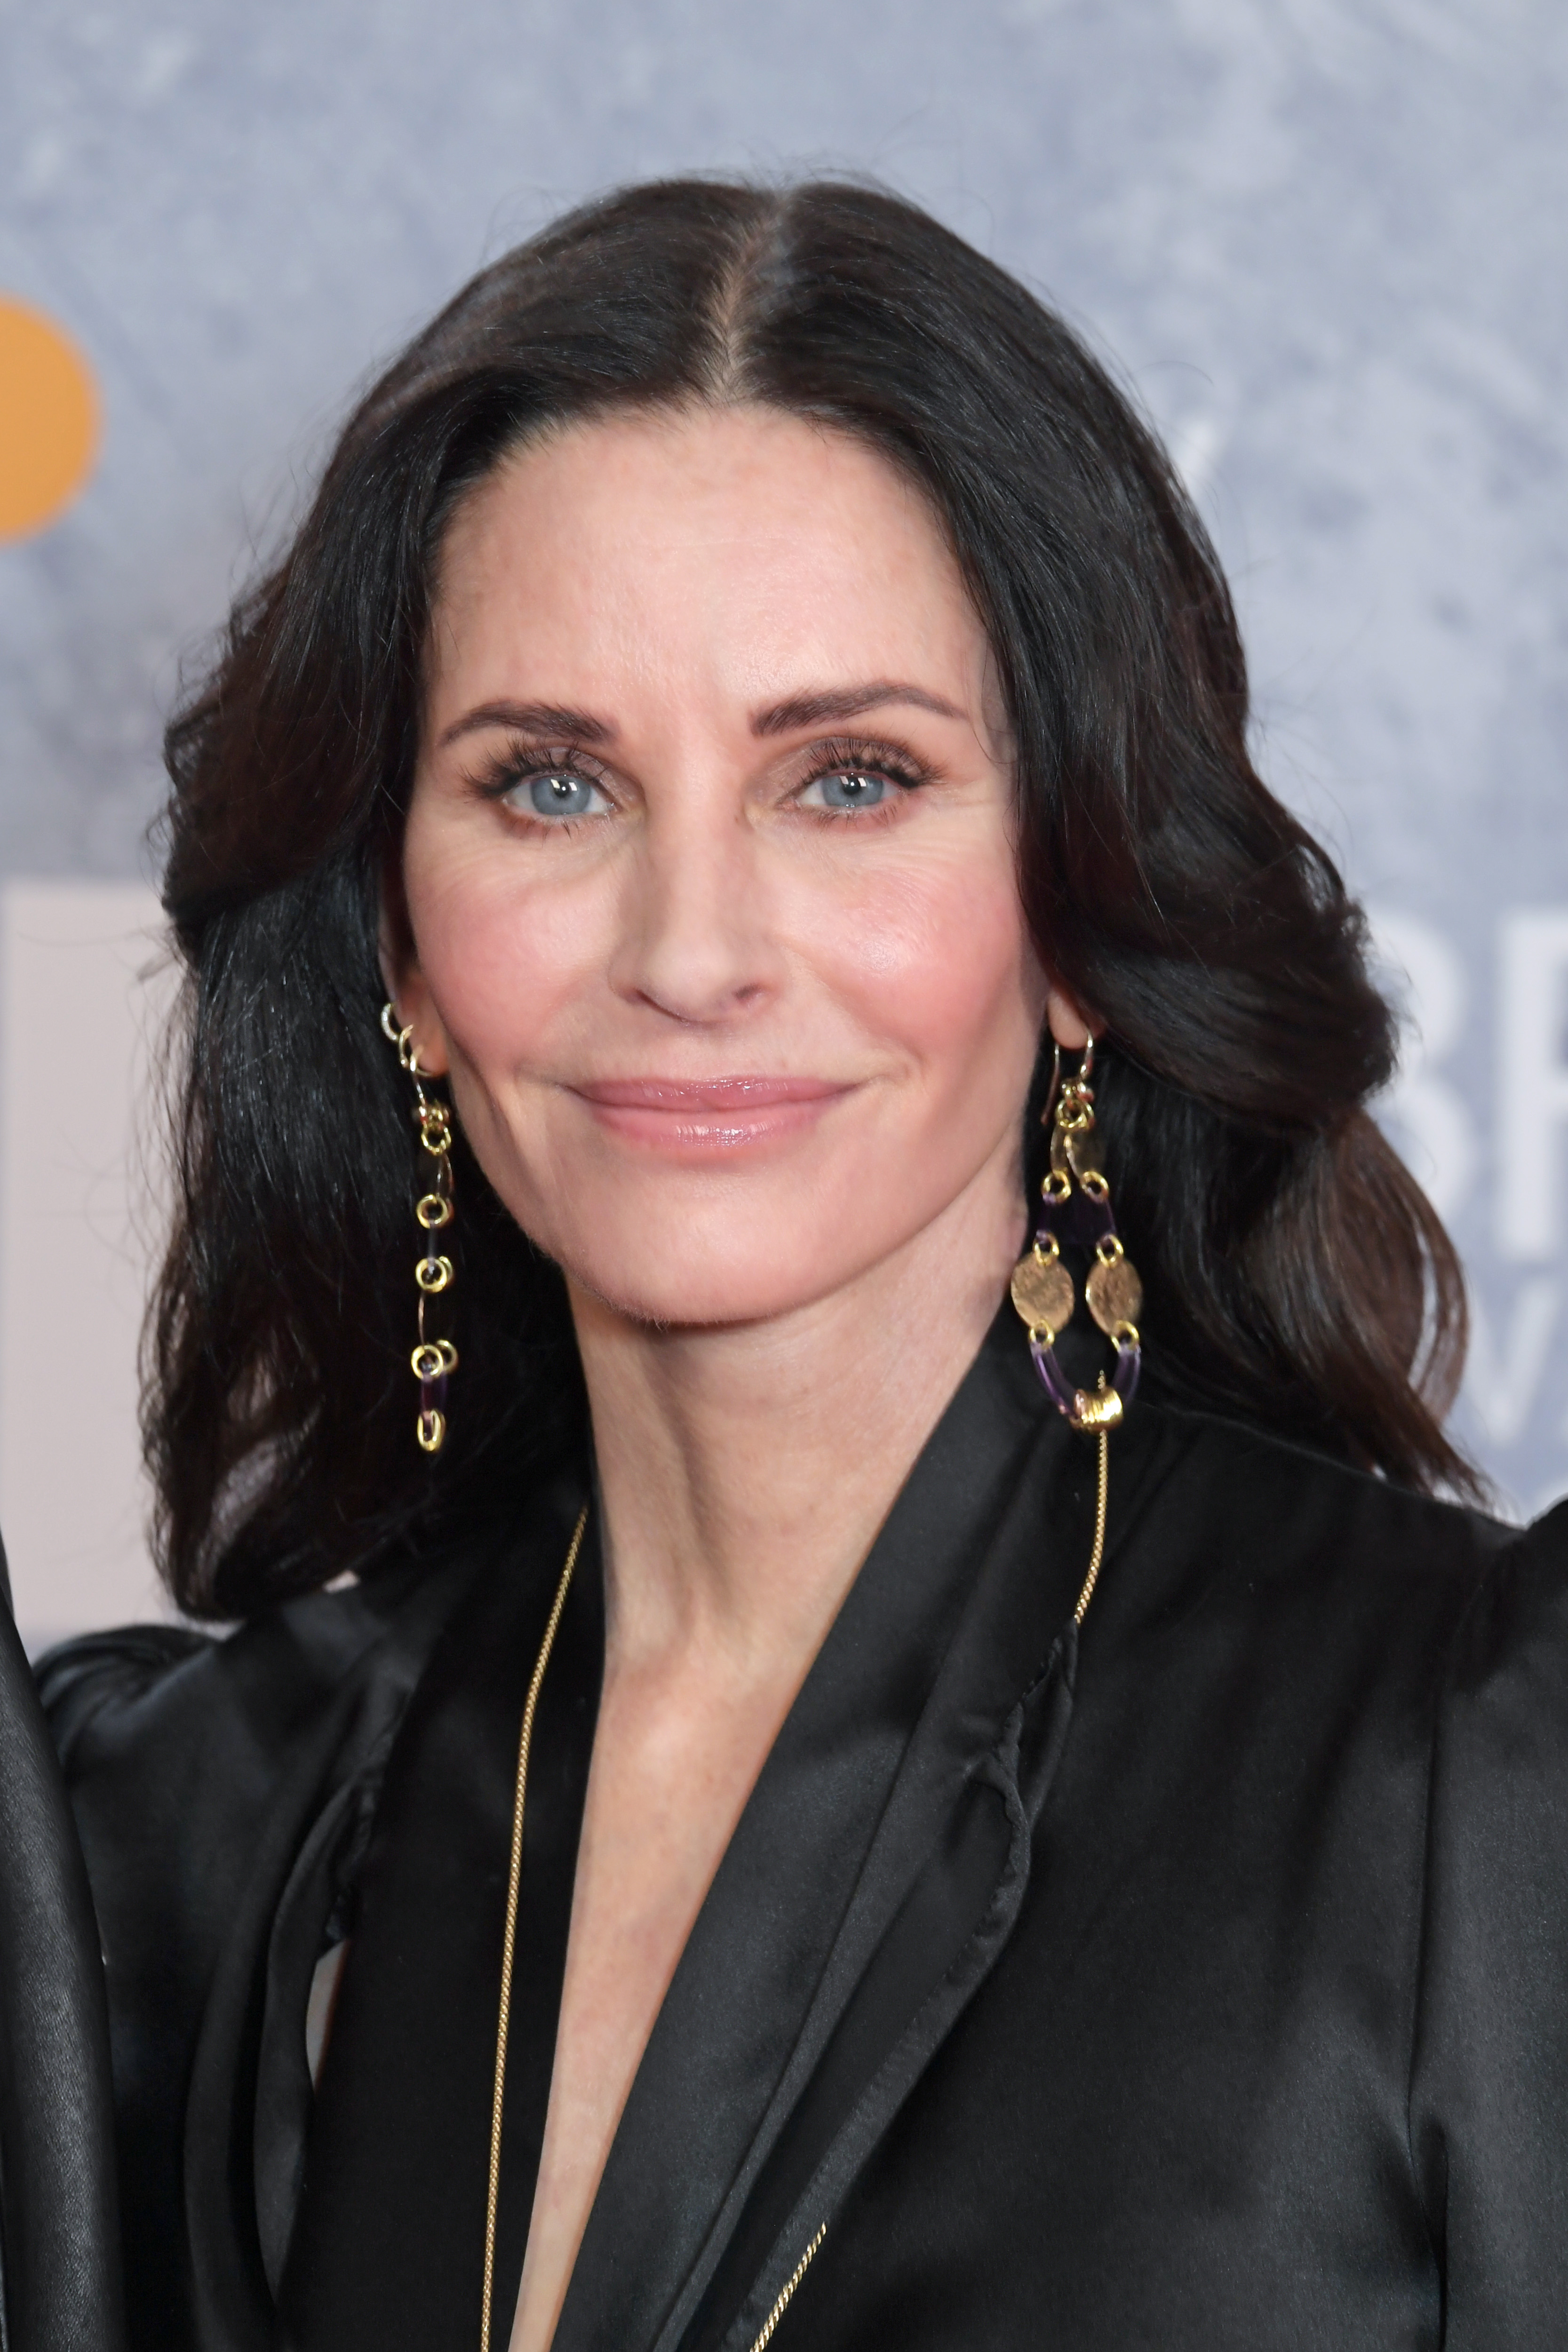 Courteney Cox arrives at The BRIT Awards at The O2 Arena in London, England, on February 8, 2022. | Source: Getty Images